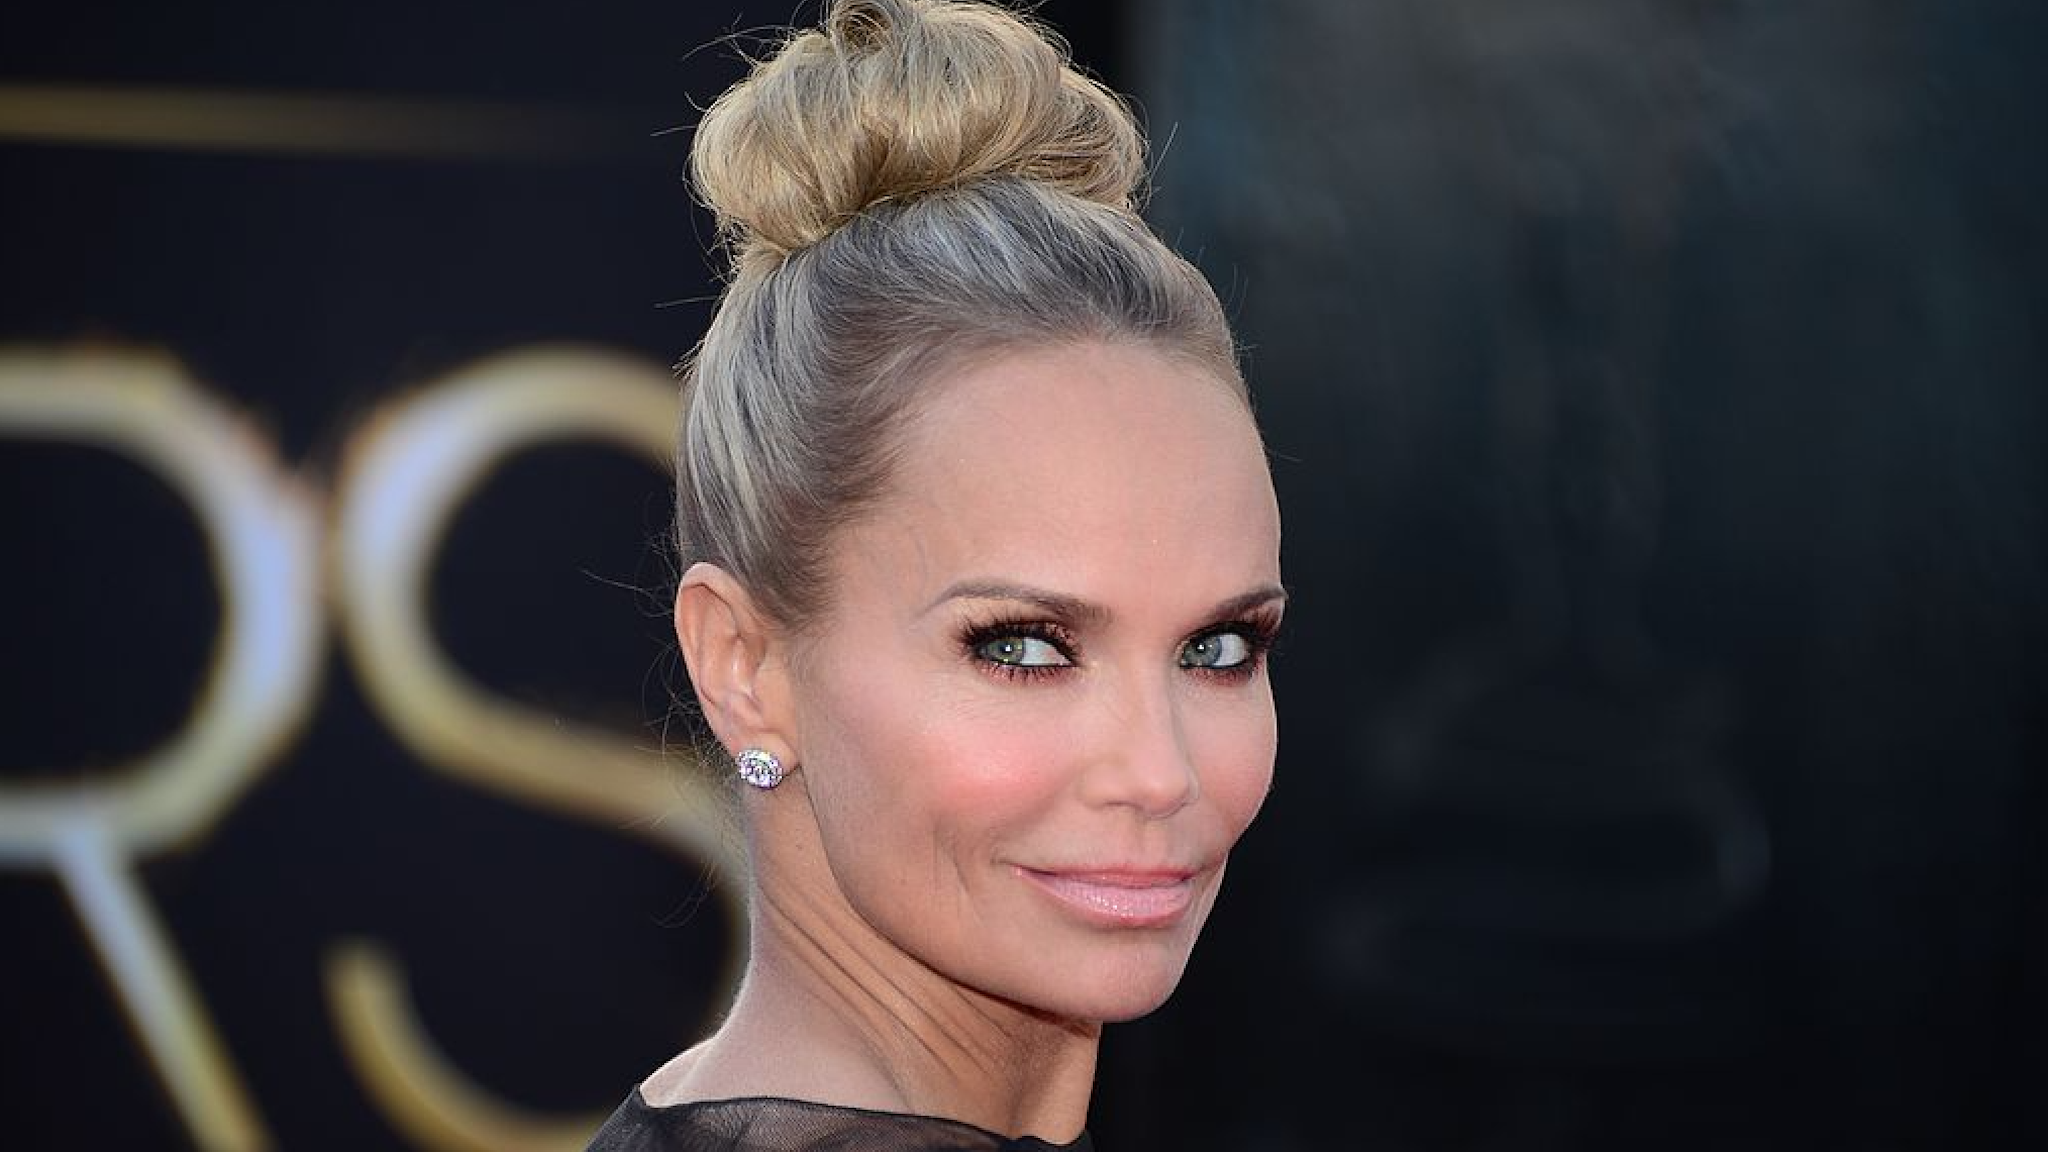 Kristen Chenoweth arrives on the red carpet for the 85th Annual Academy Awards on February 24, 2013 in Hollywood, California.